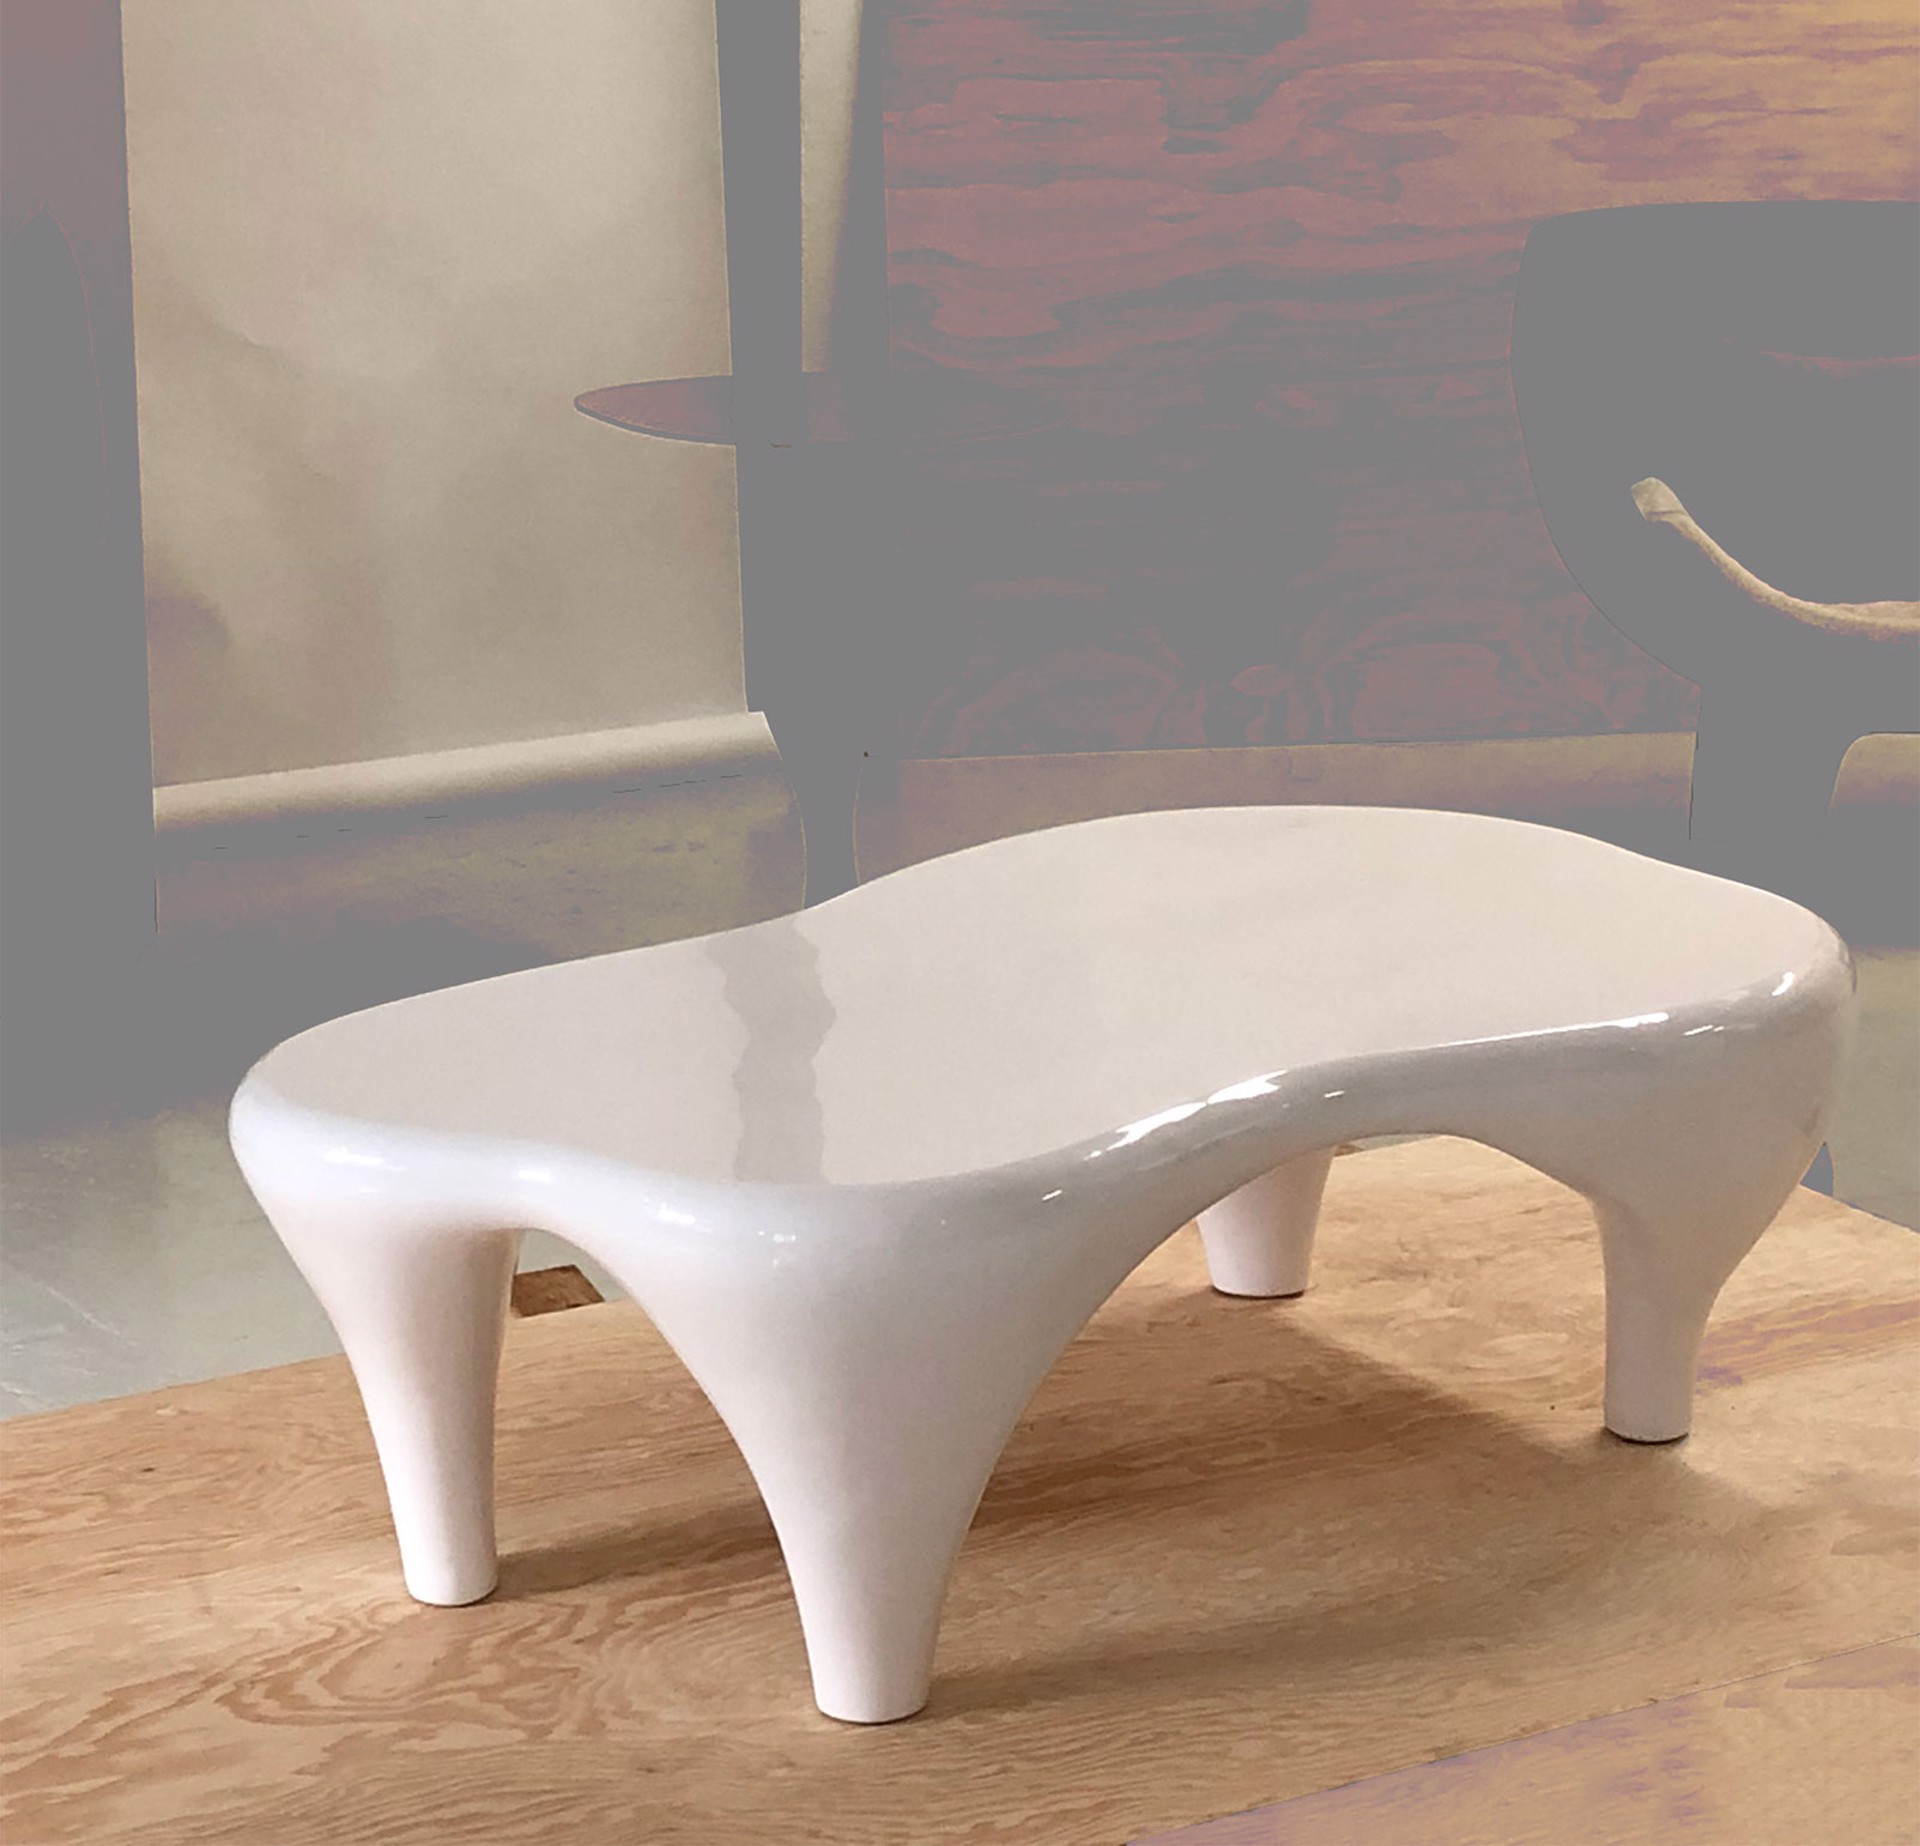 "Toro" Coffee Table in white by Jacques Jarrige